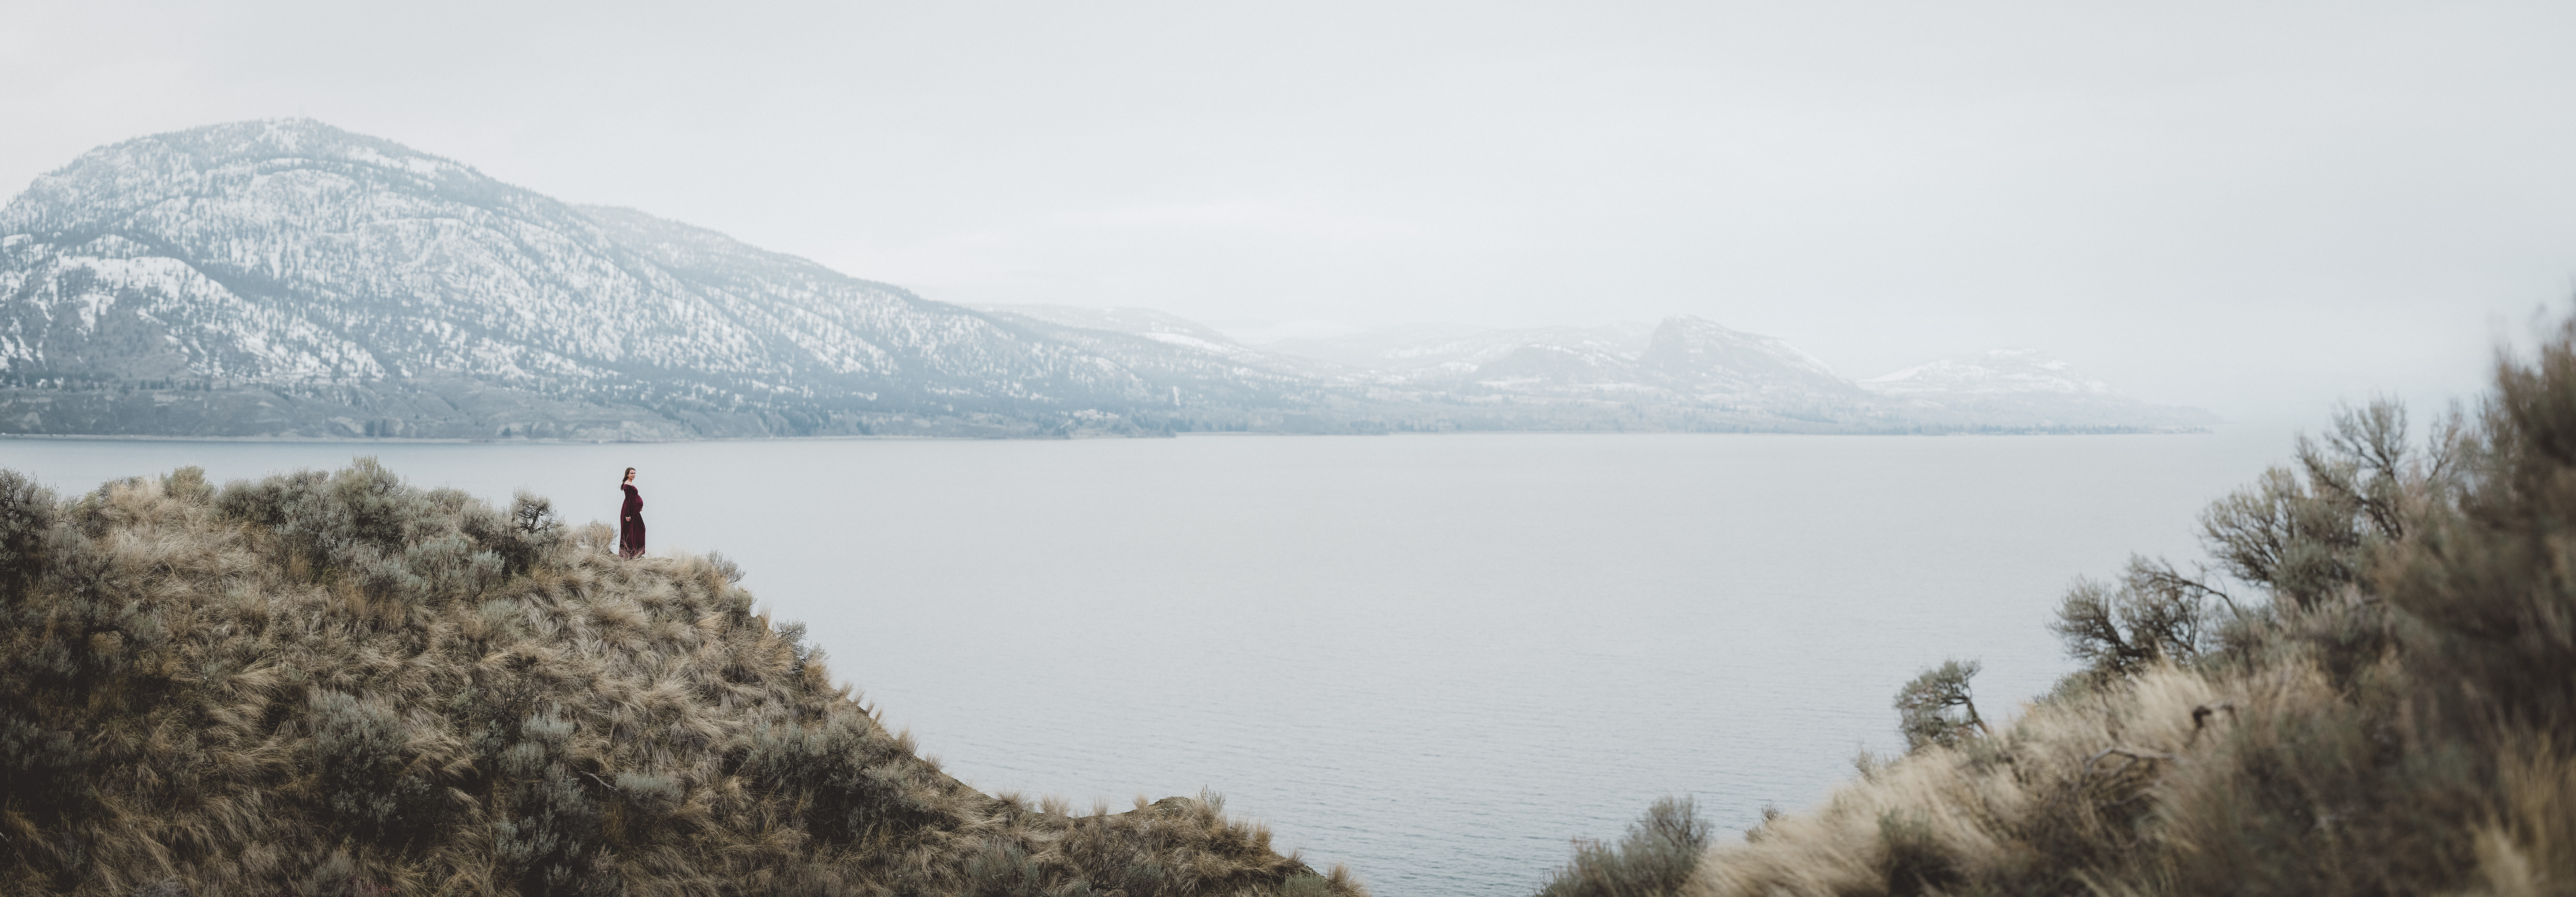 Okanagan Lake with a pregnant woman standing on a cliff